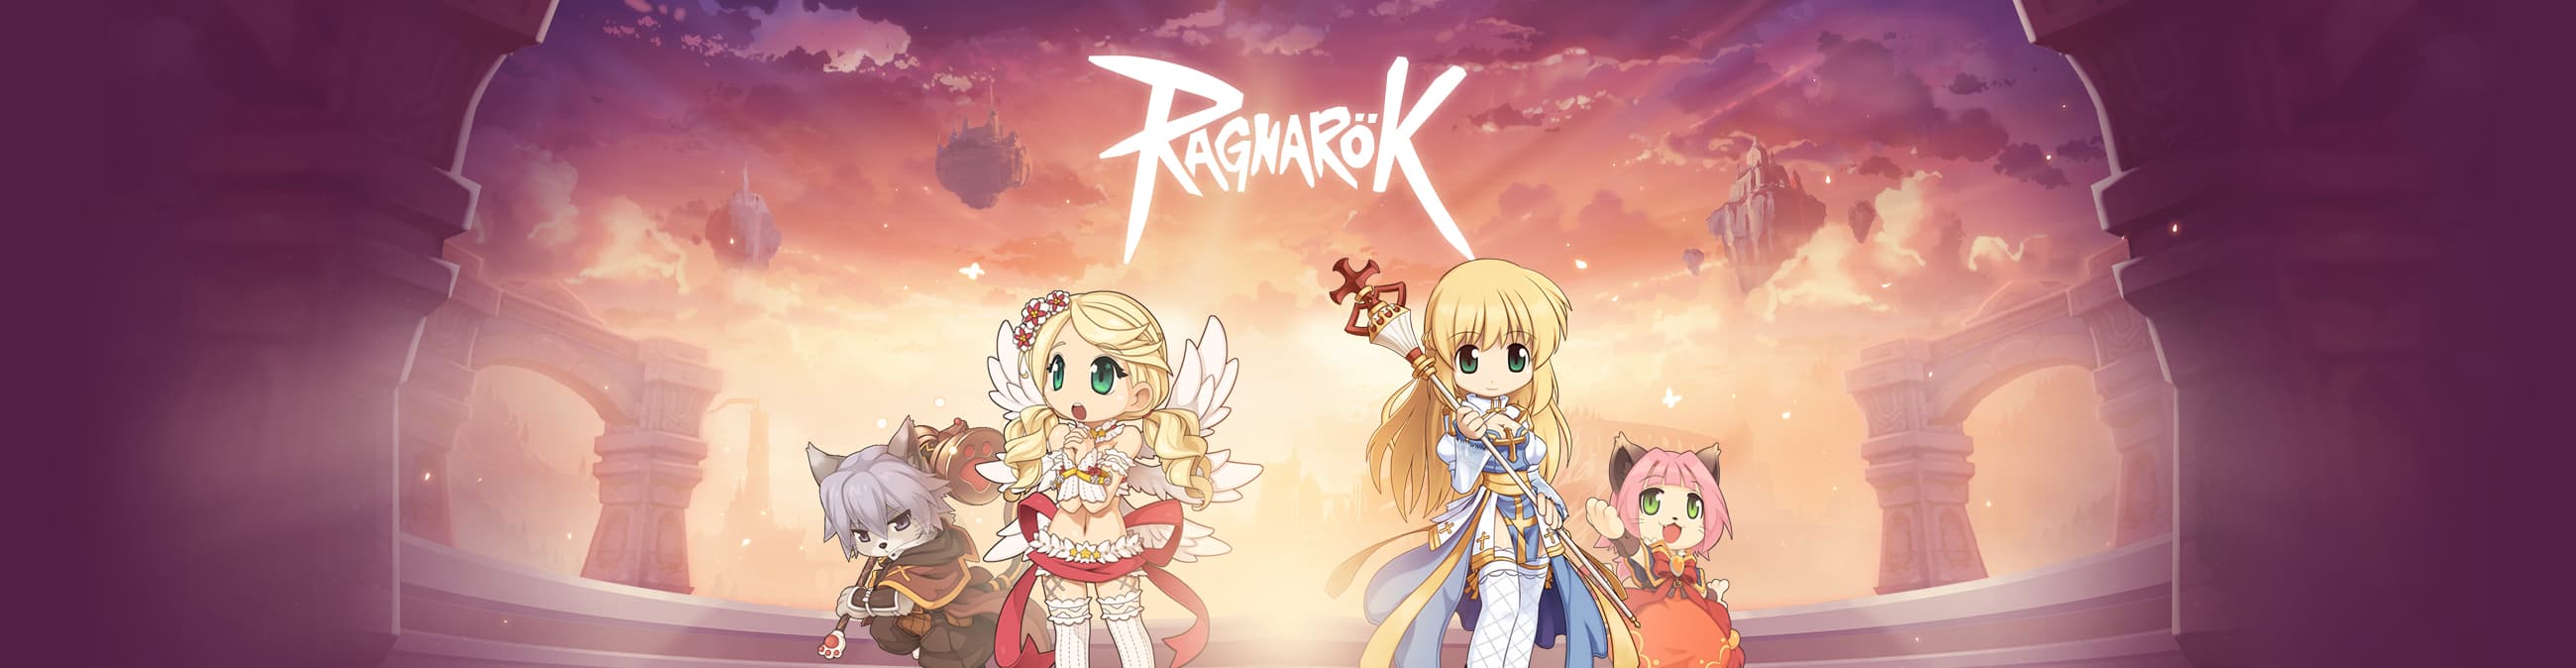 Ragnarok the Animation Complete (Episode 1 - 26)  Ragnarok the Animation  Episode 1 Did you know that you can also take a quest based on Ragnarok the  Animation Story in our